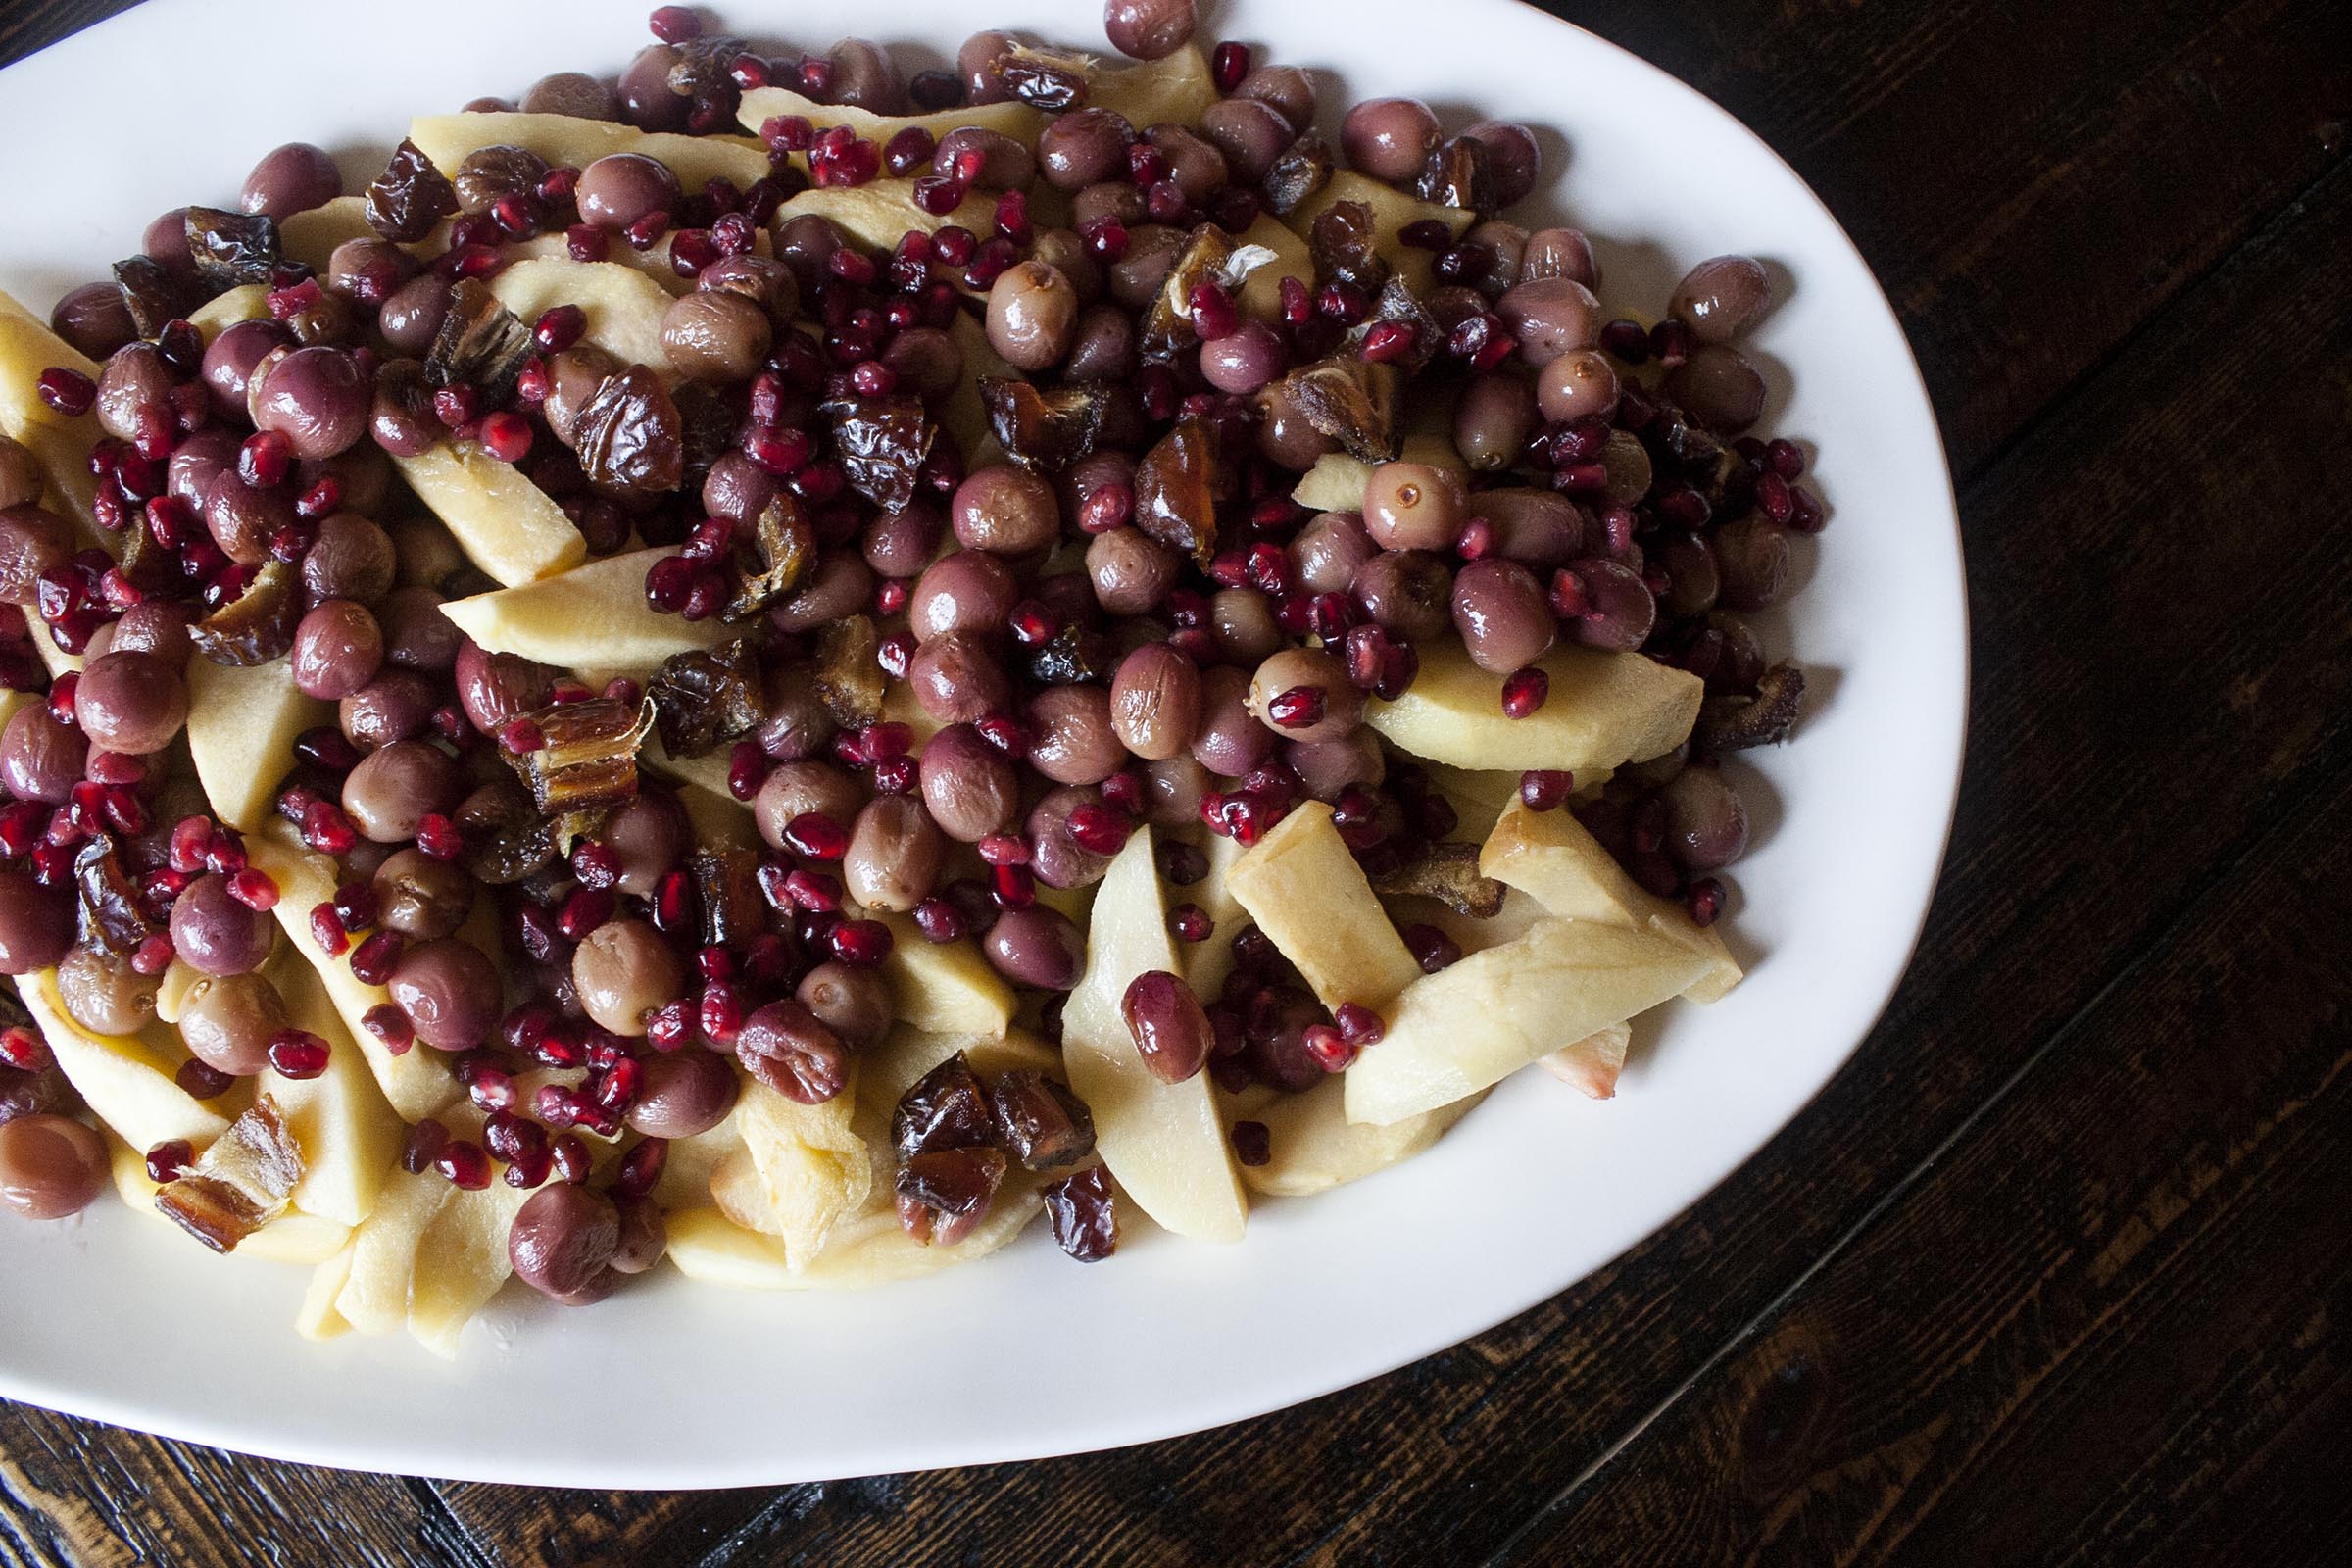 A Winter Fruit Salad: Roasted Apples, Roasted Grapes, Sliced Dates and Pomegranate Seeds. I lifeaswecookit.com